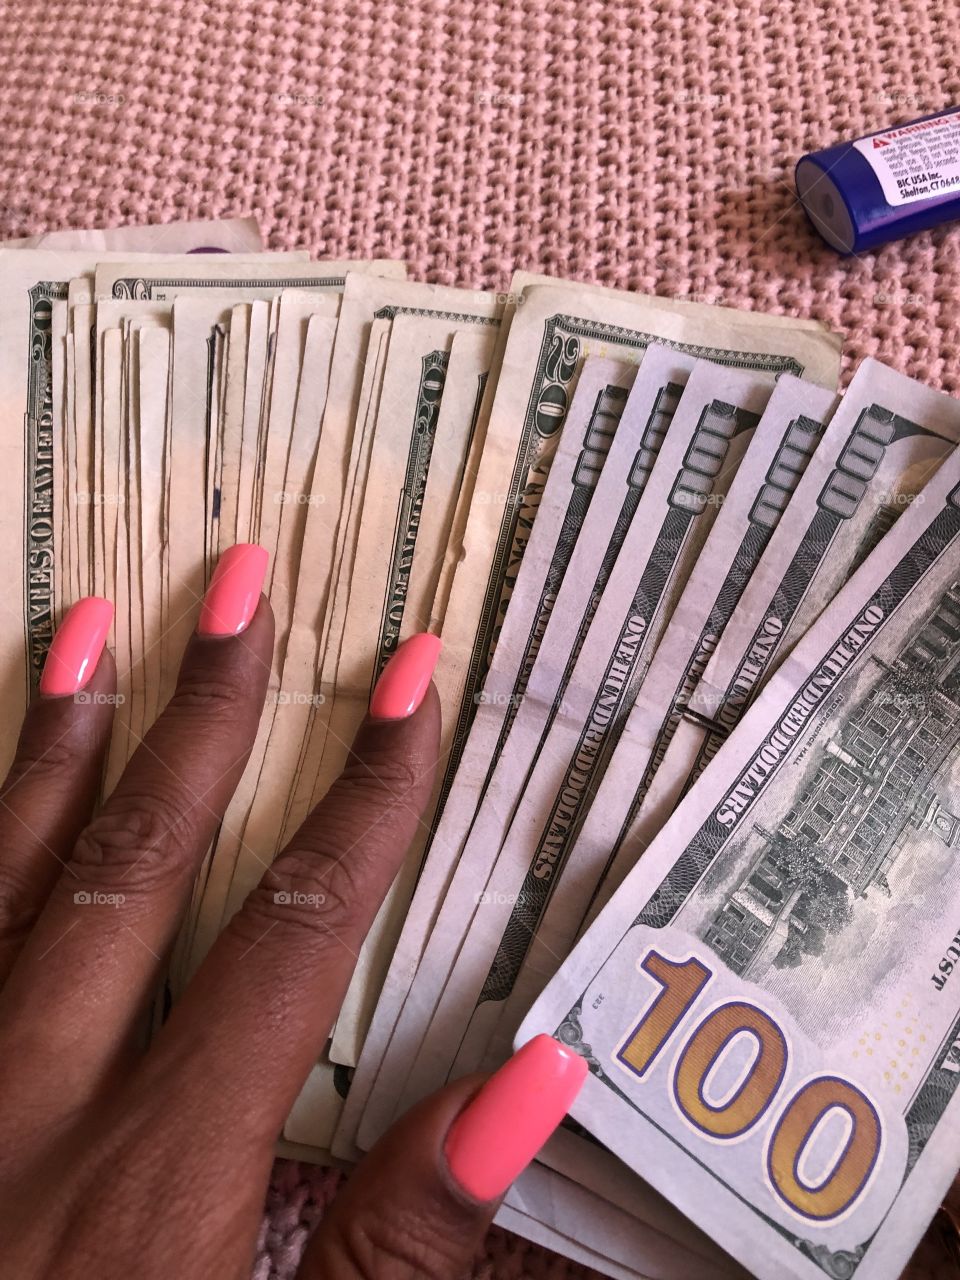 My nails on a pay day ✔️